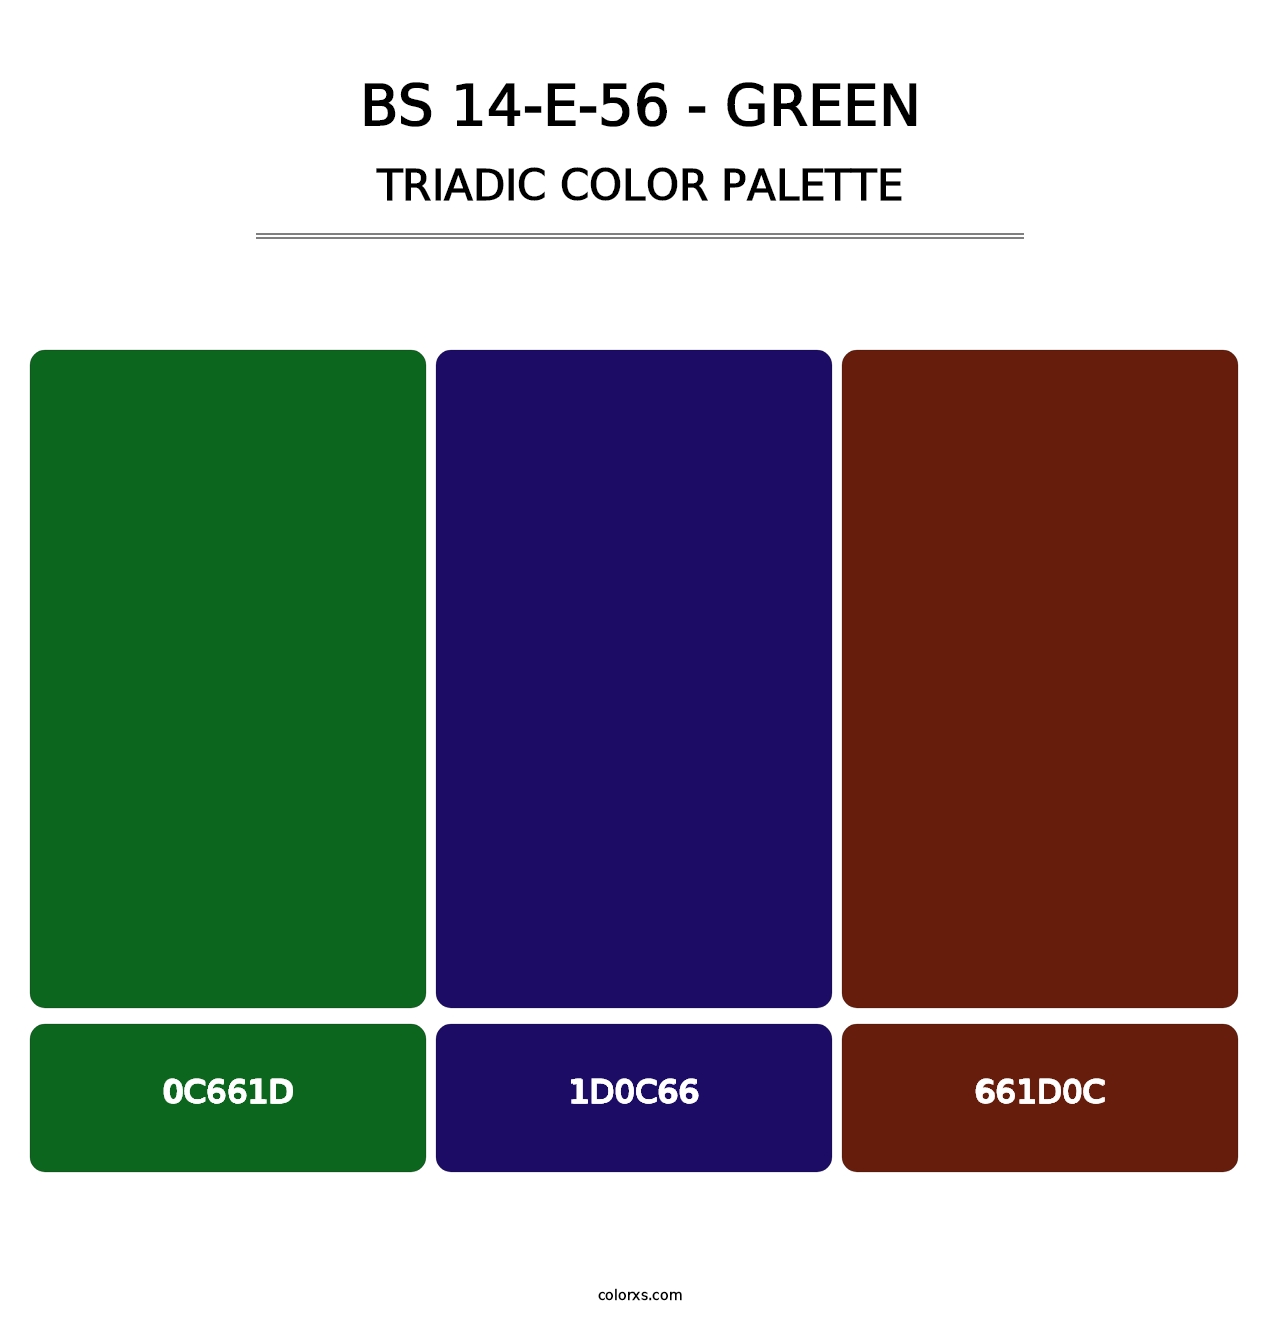 BS 14-E-56 - Green - Triadic Color Palette